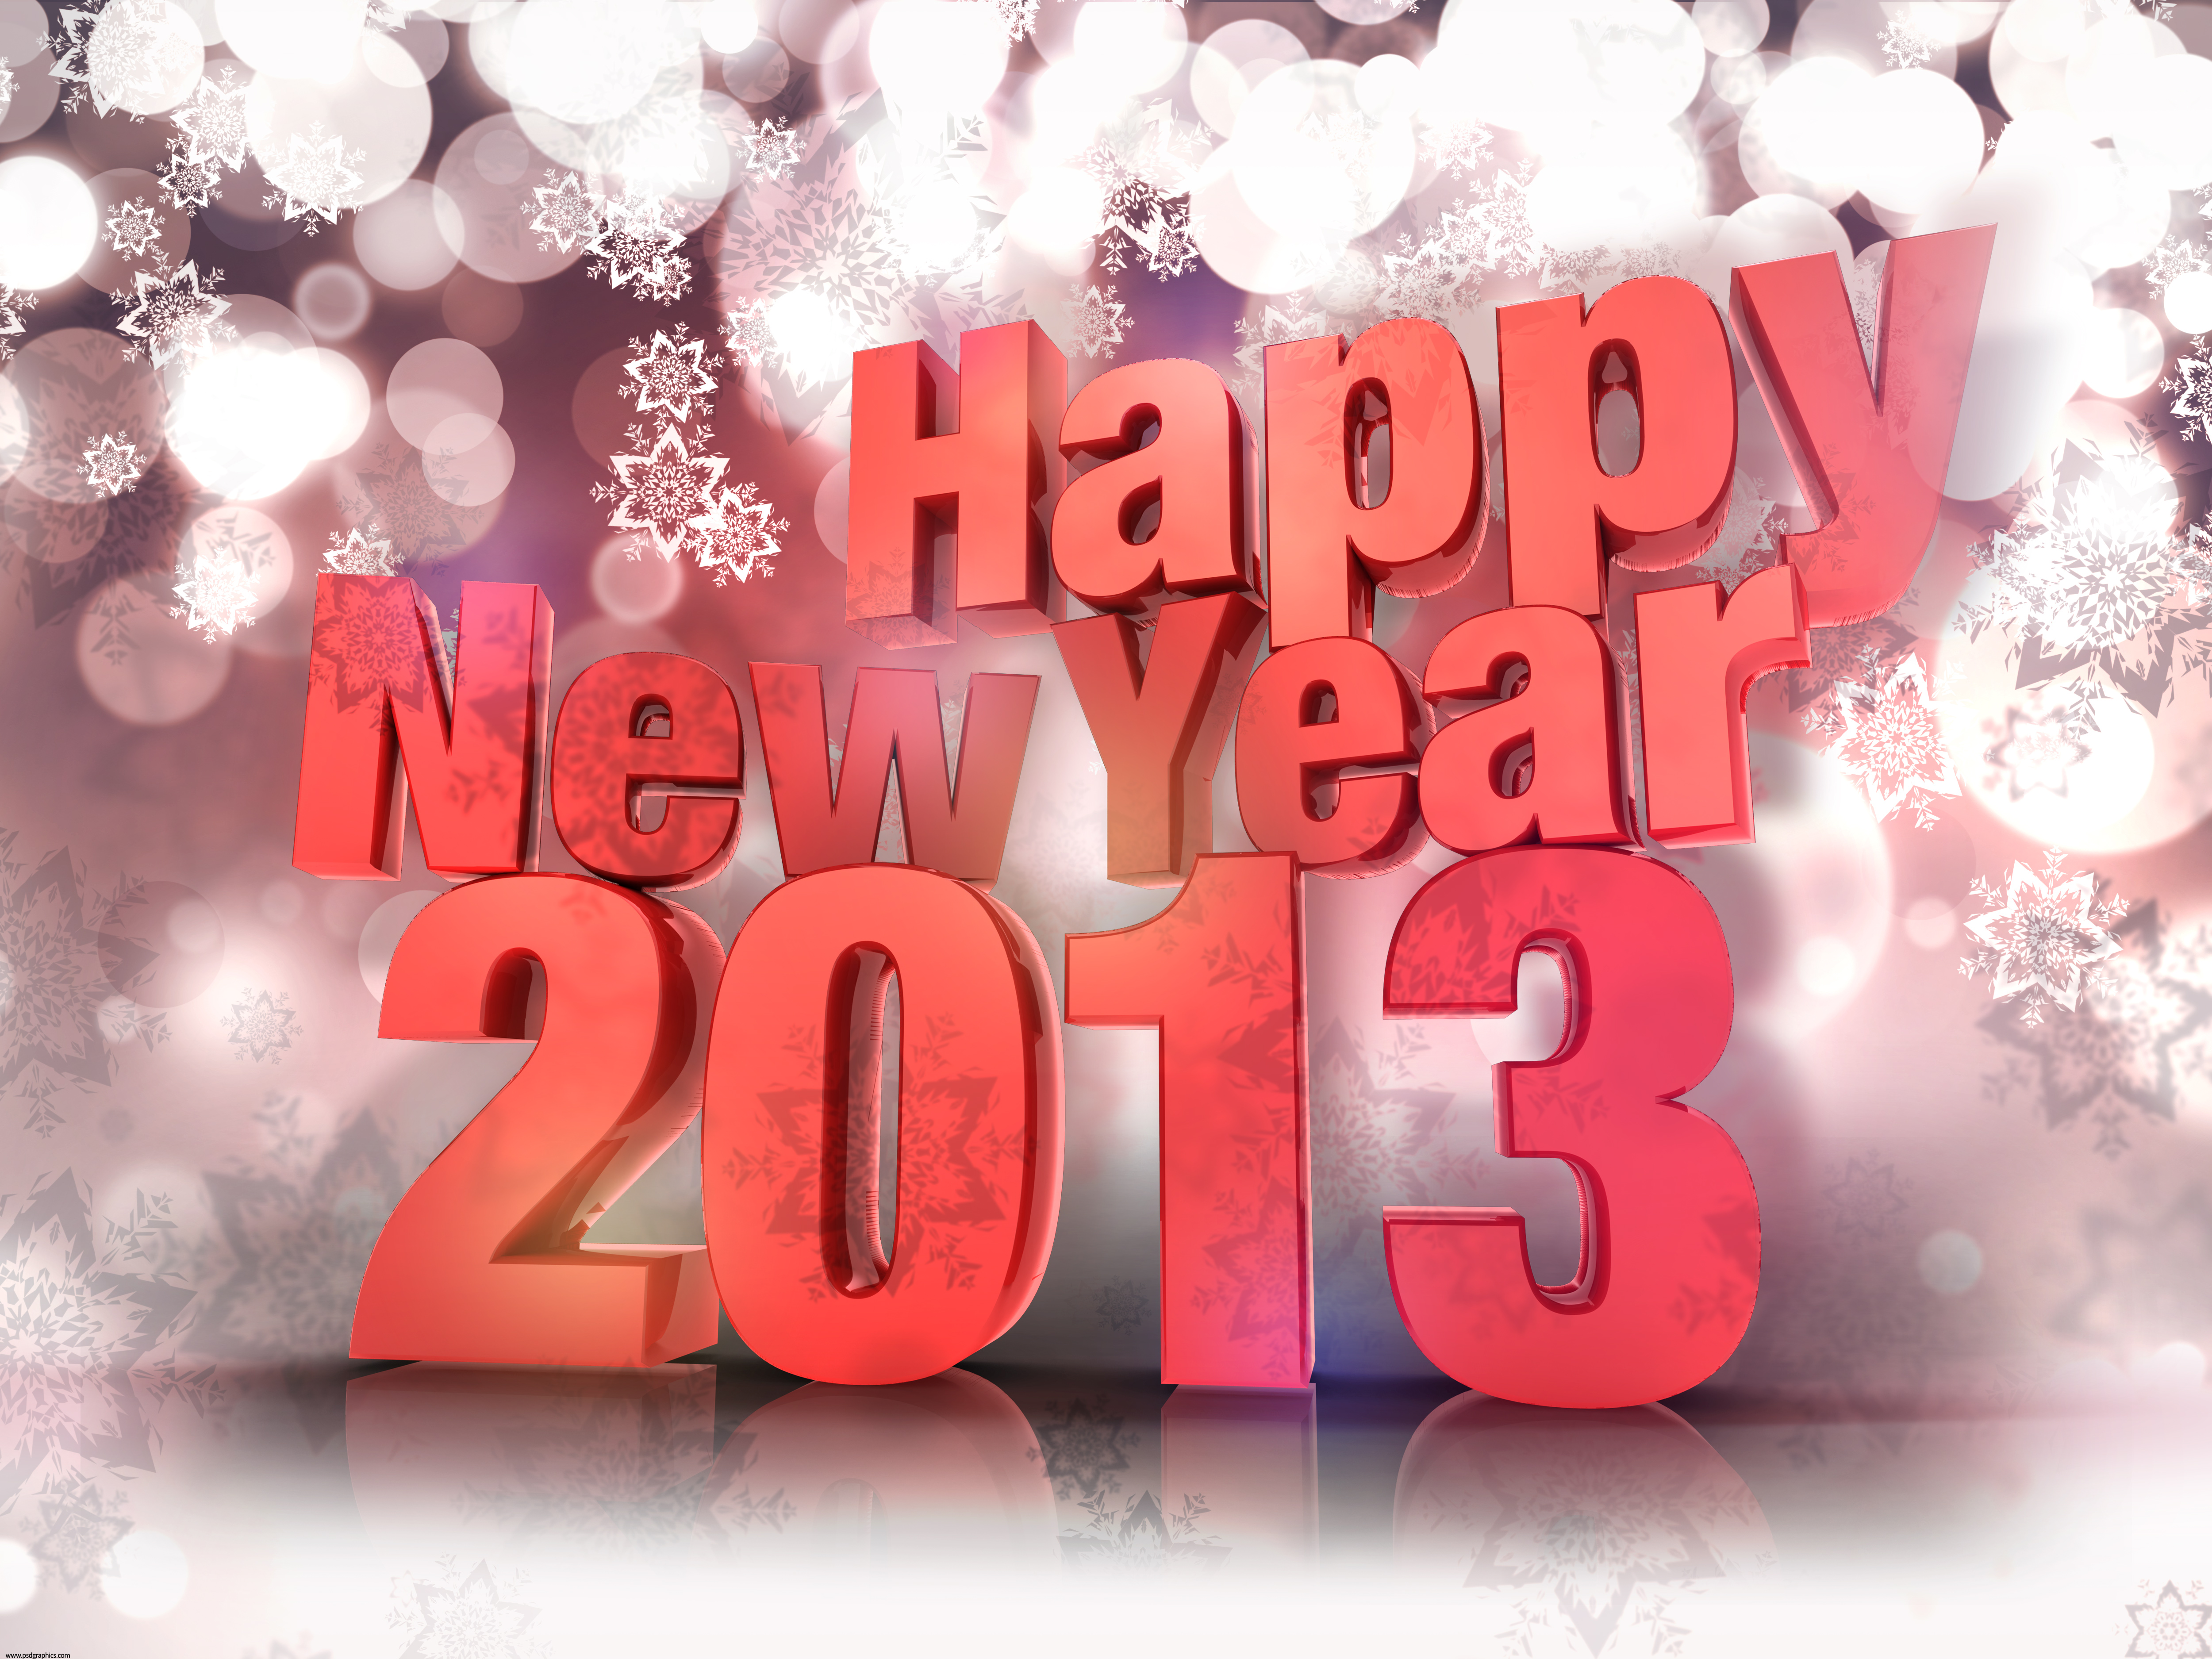 High Resolution Wallpaper | New Year 2013 5000x3750 px